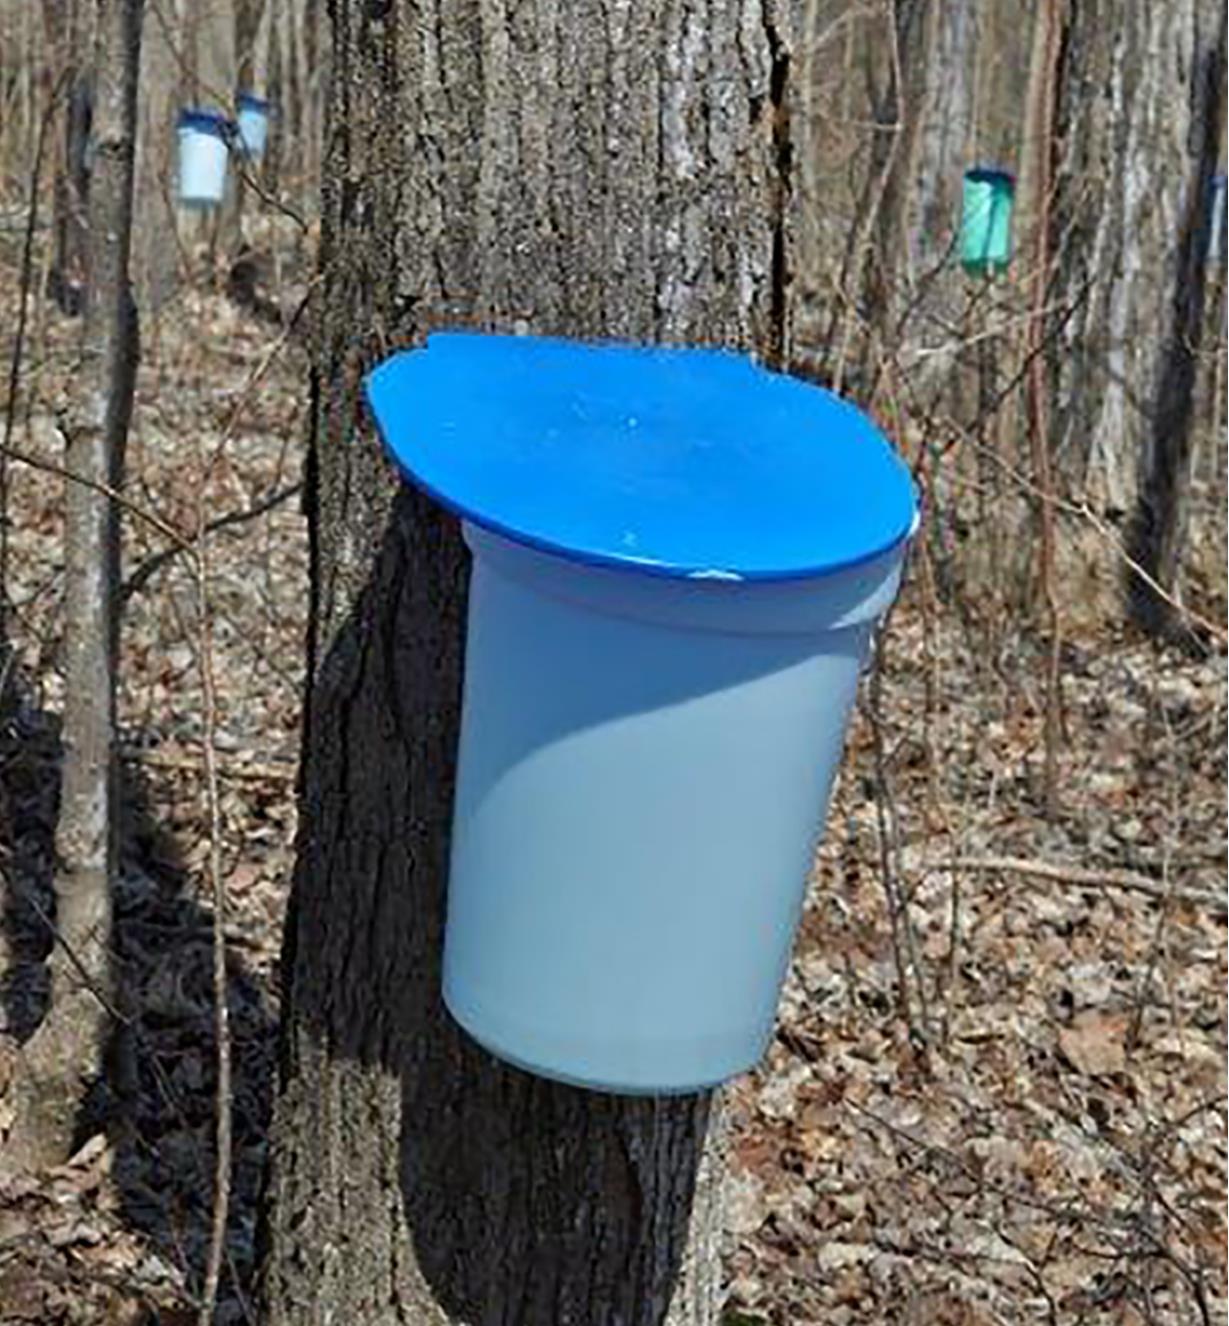 Covered bucket from the maple syrup starter kit hangs on a maple tree